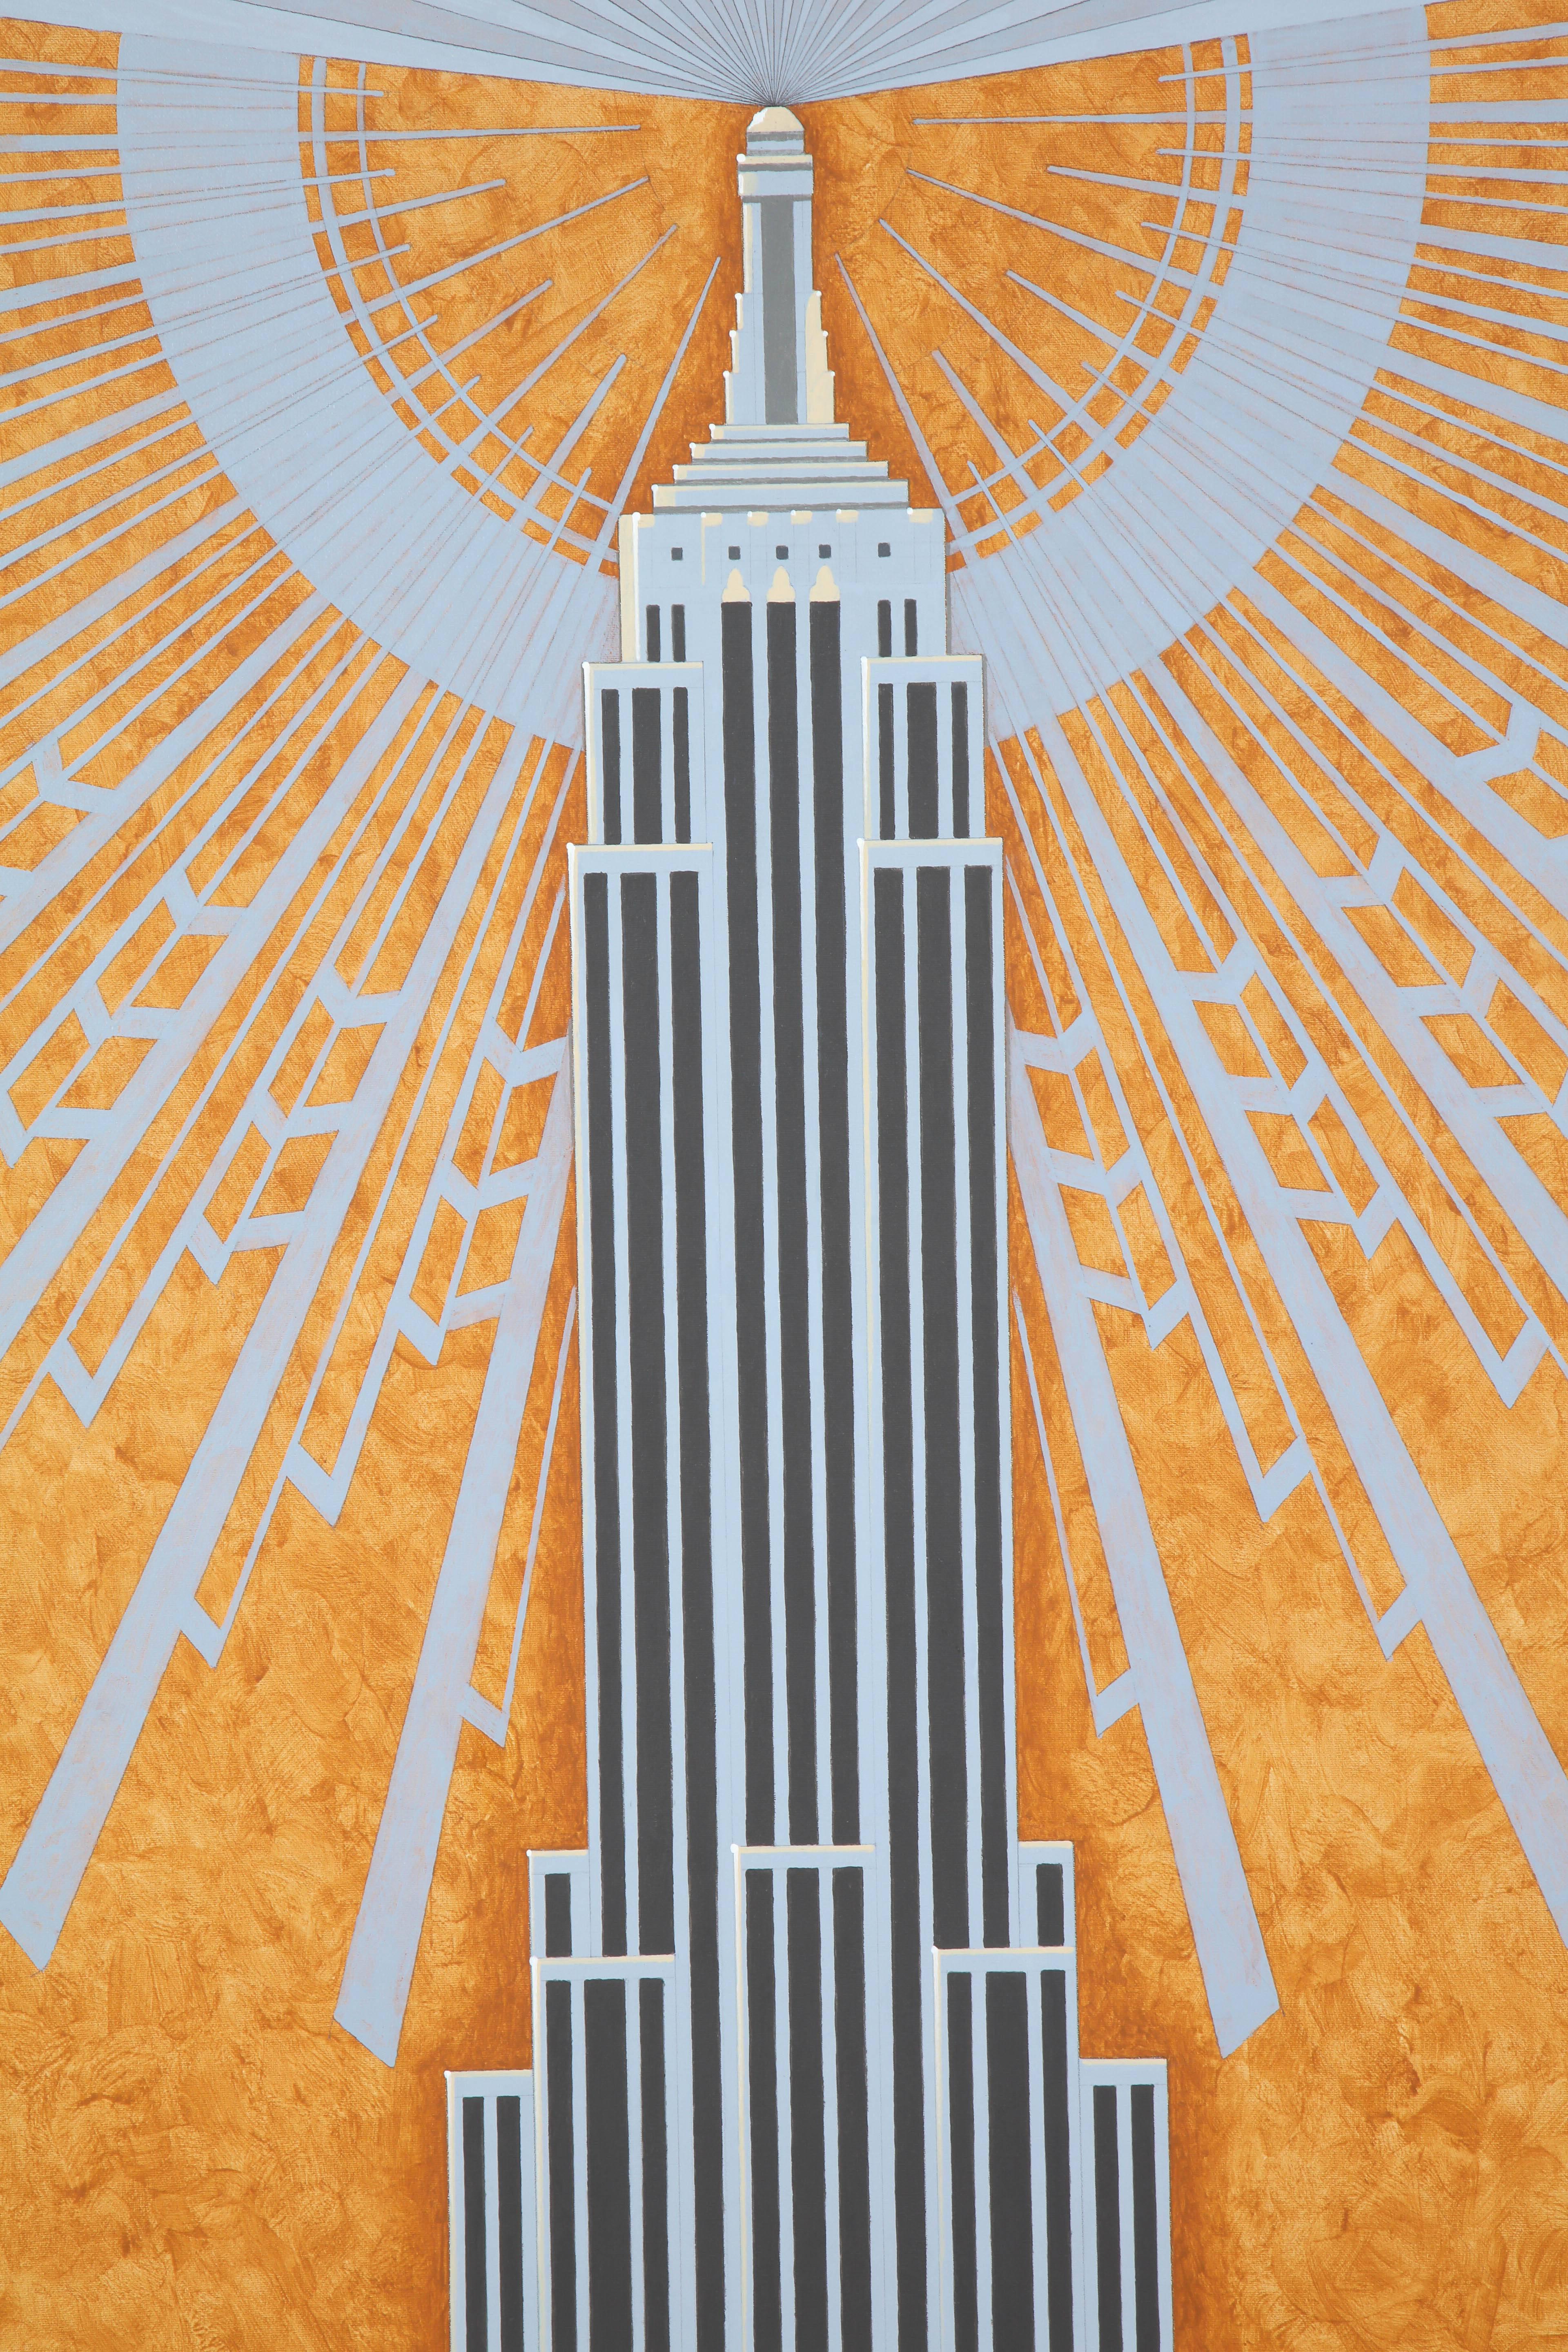 Empire. An original painting by Lynn Curlee.

This painting was used as an illustration in skyscraper, an award winning book for children by author/illustrator Lynn Curlee.

It is acrylic on canvas. The edges are fully finished and paintinged so